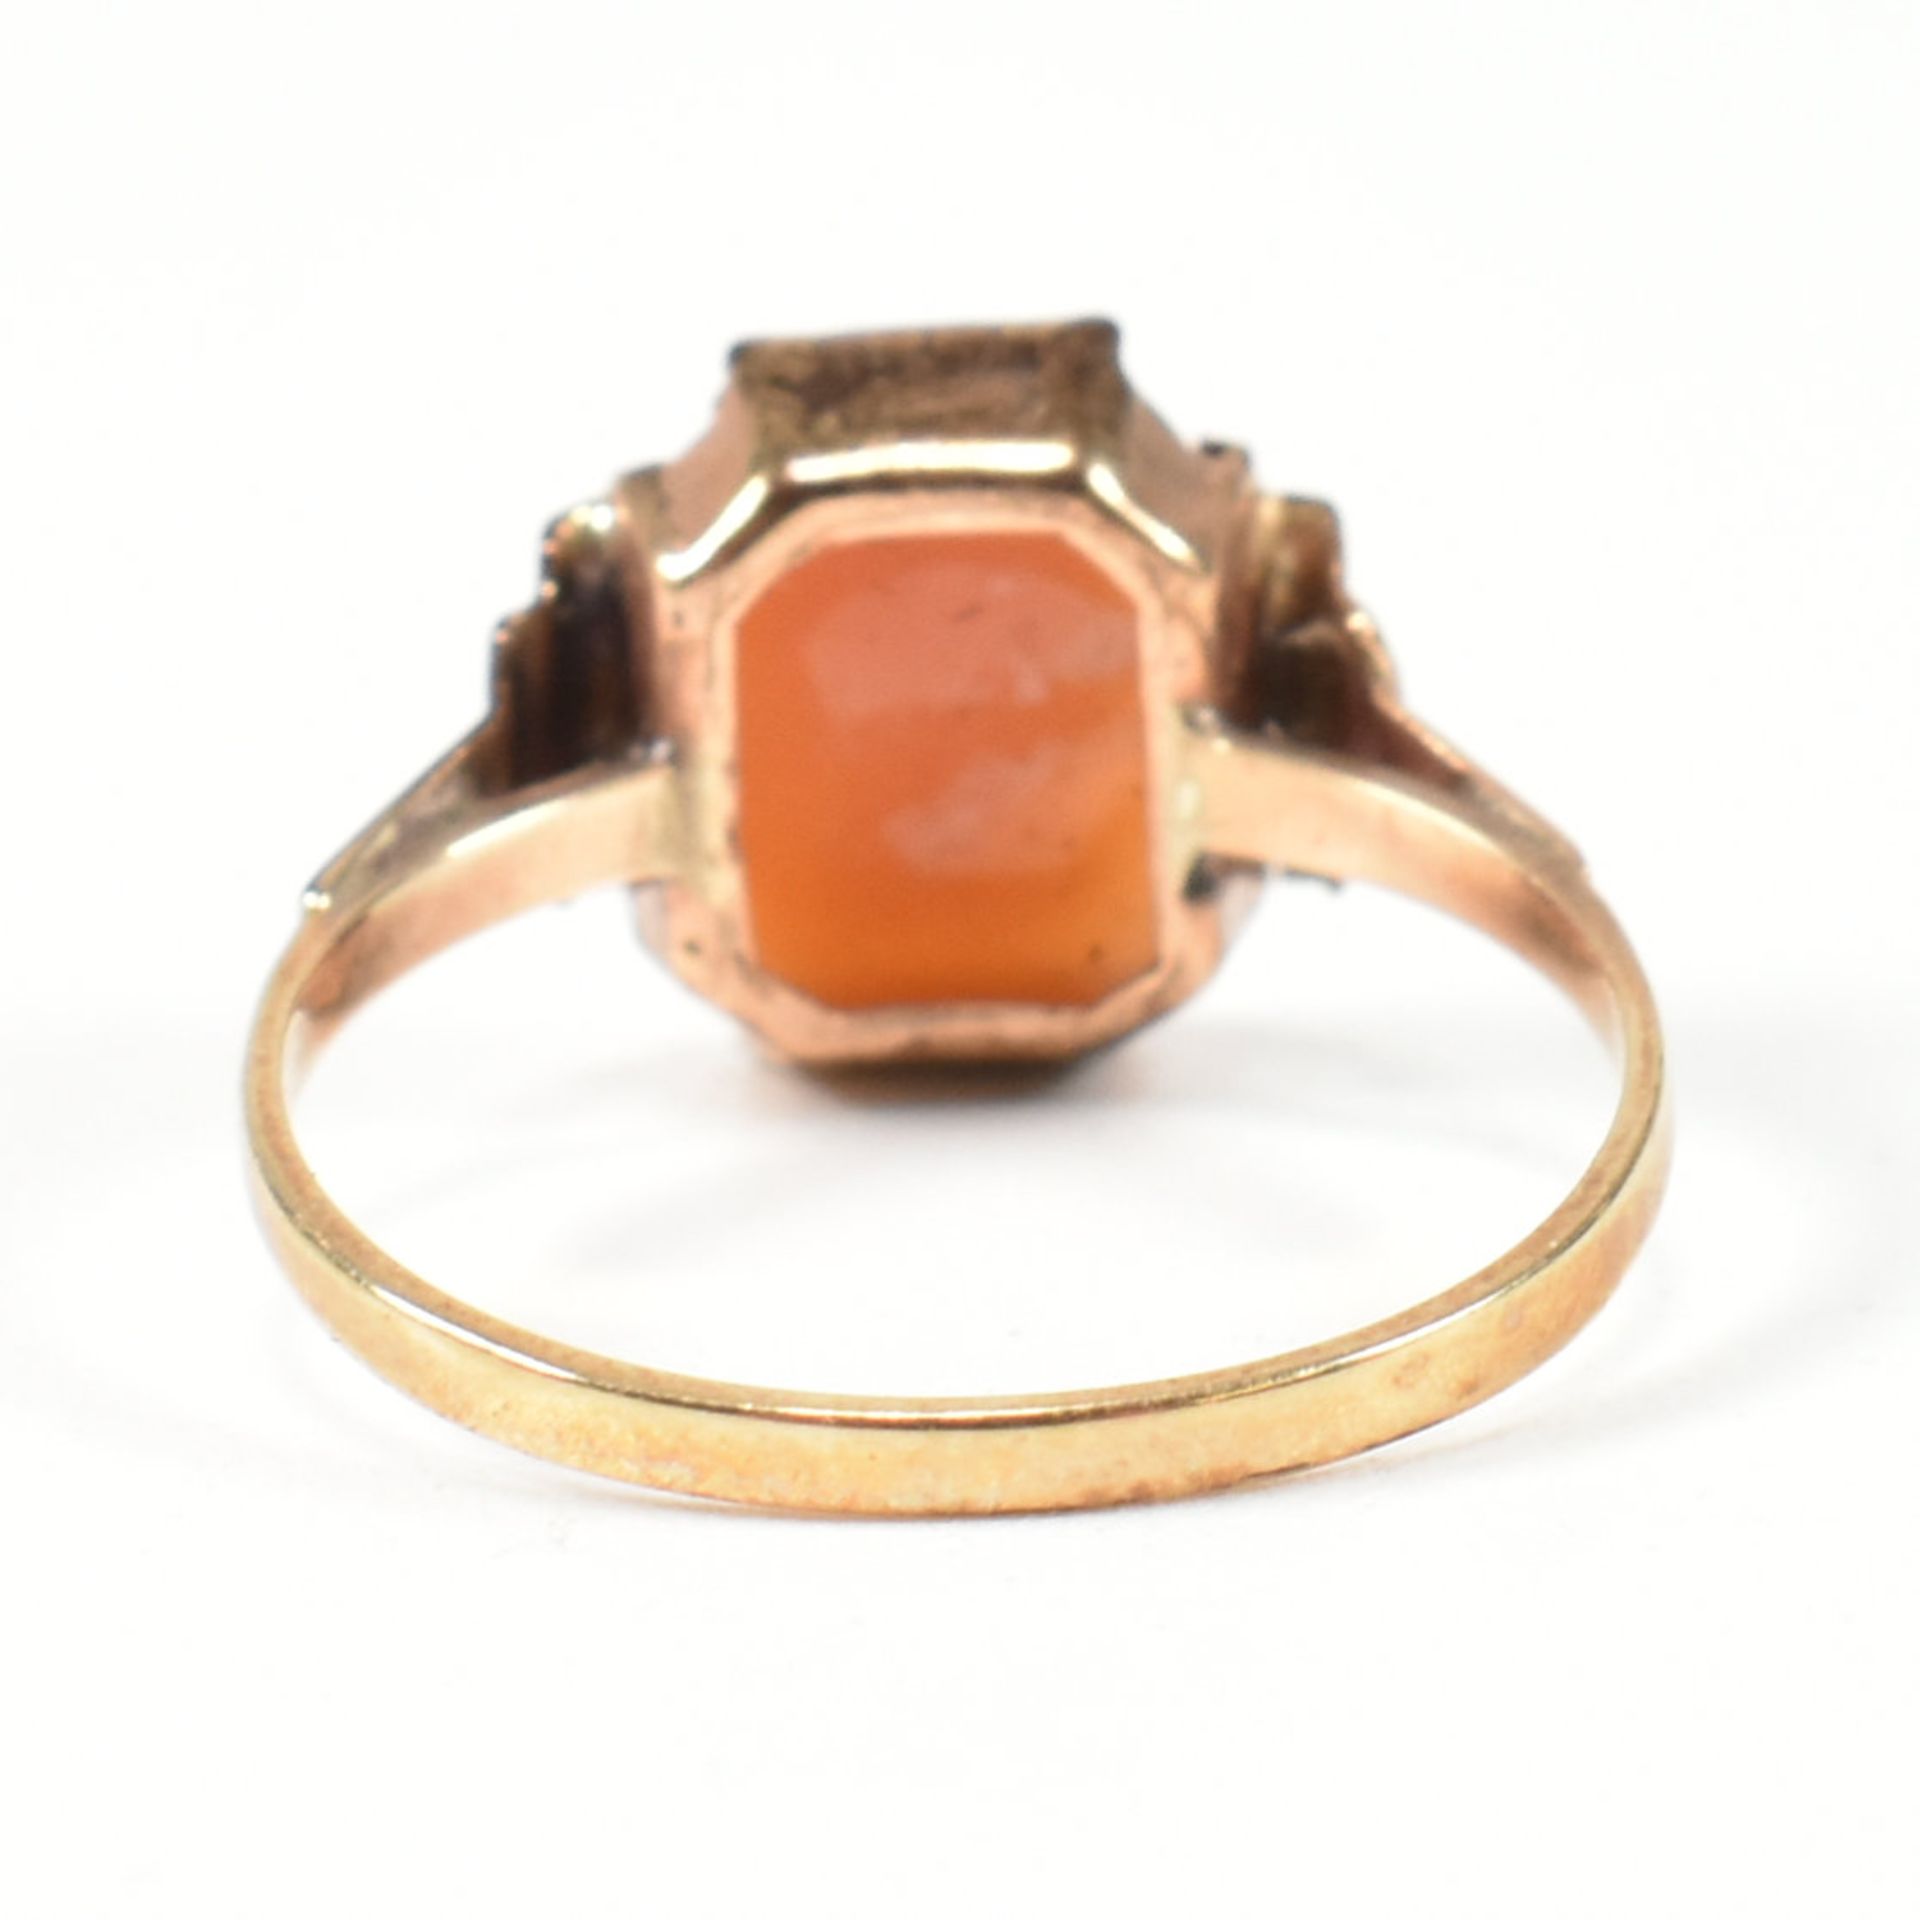 9CT GOLD CAMEO RING - Image 5 of 7